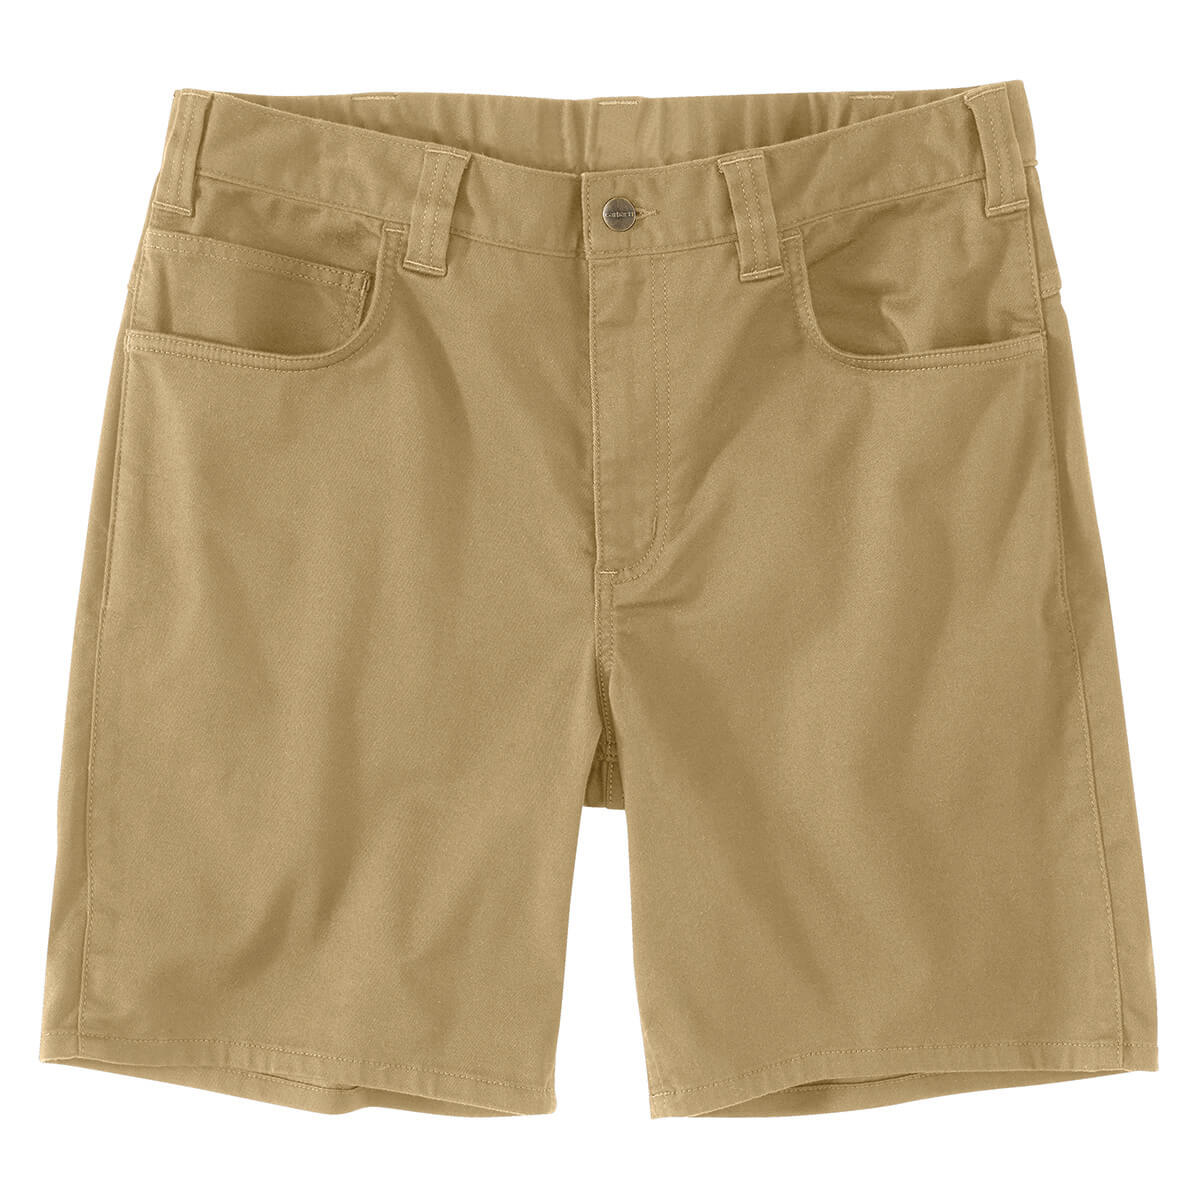 106280 - Carhartt  Men's Force® Relaxed Fit Short - 9 Inch